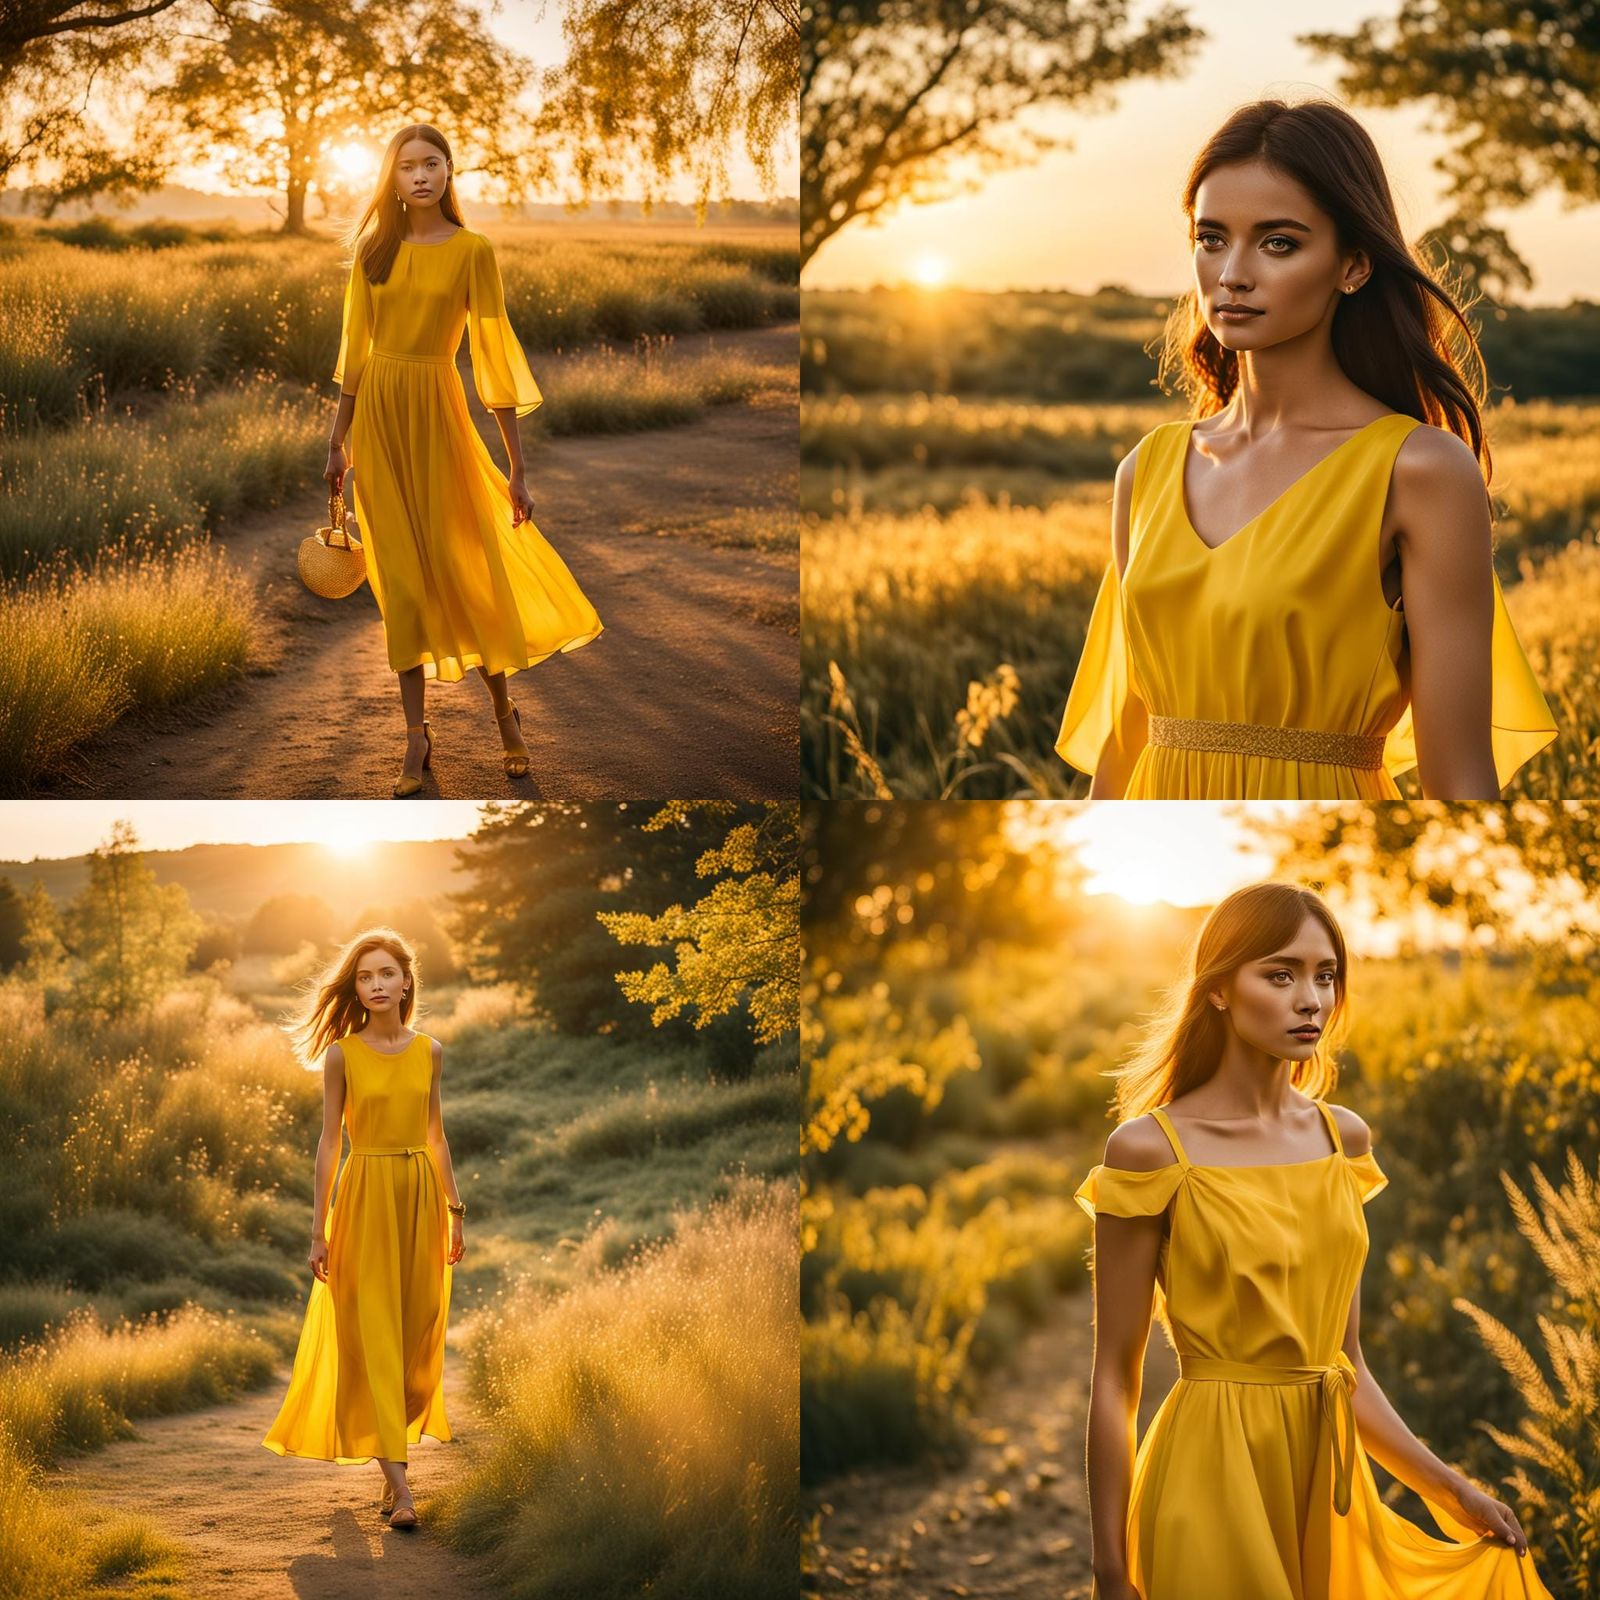 A woman in a yellow dress in the golden hour